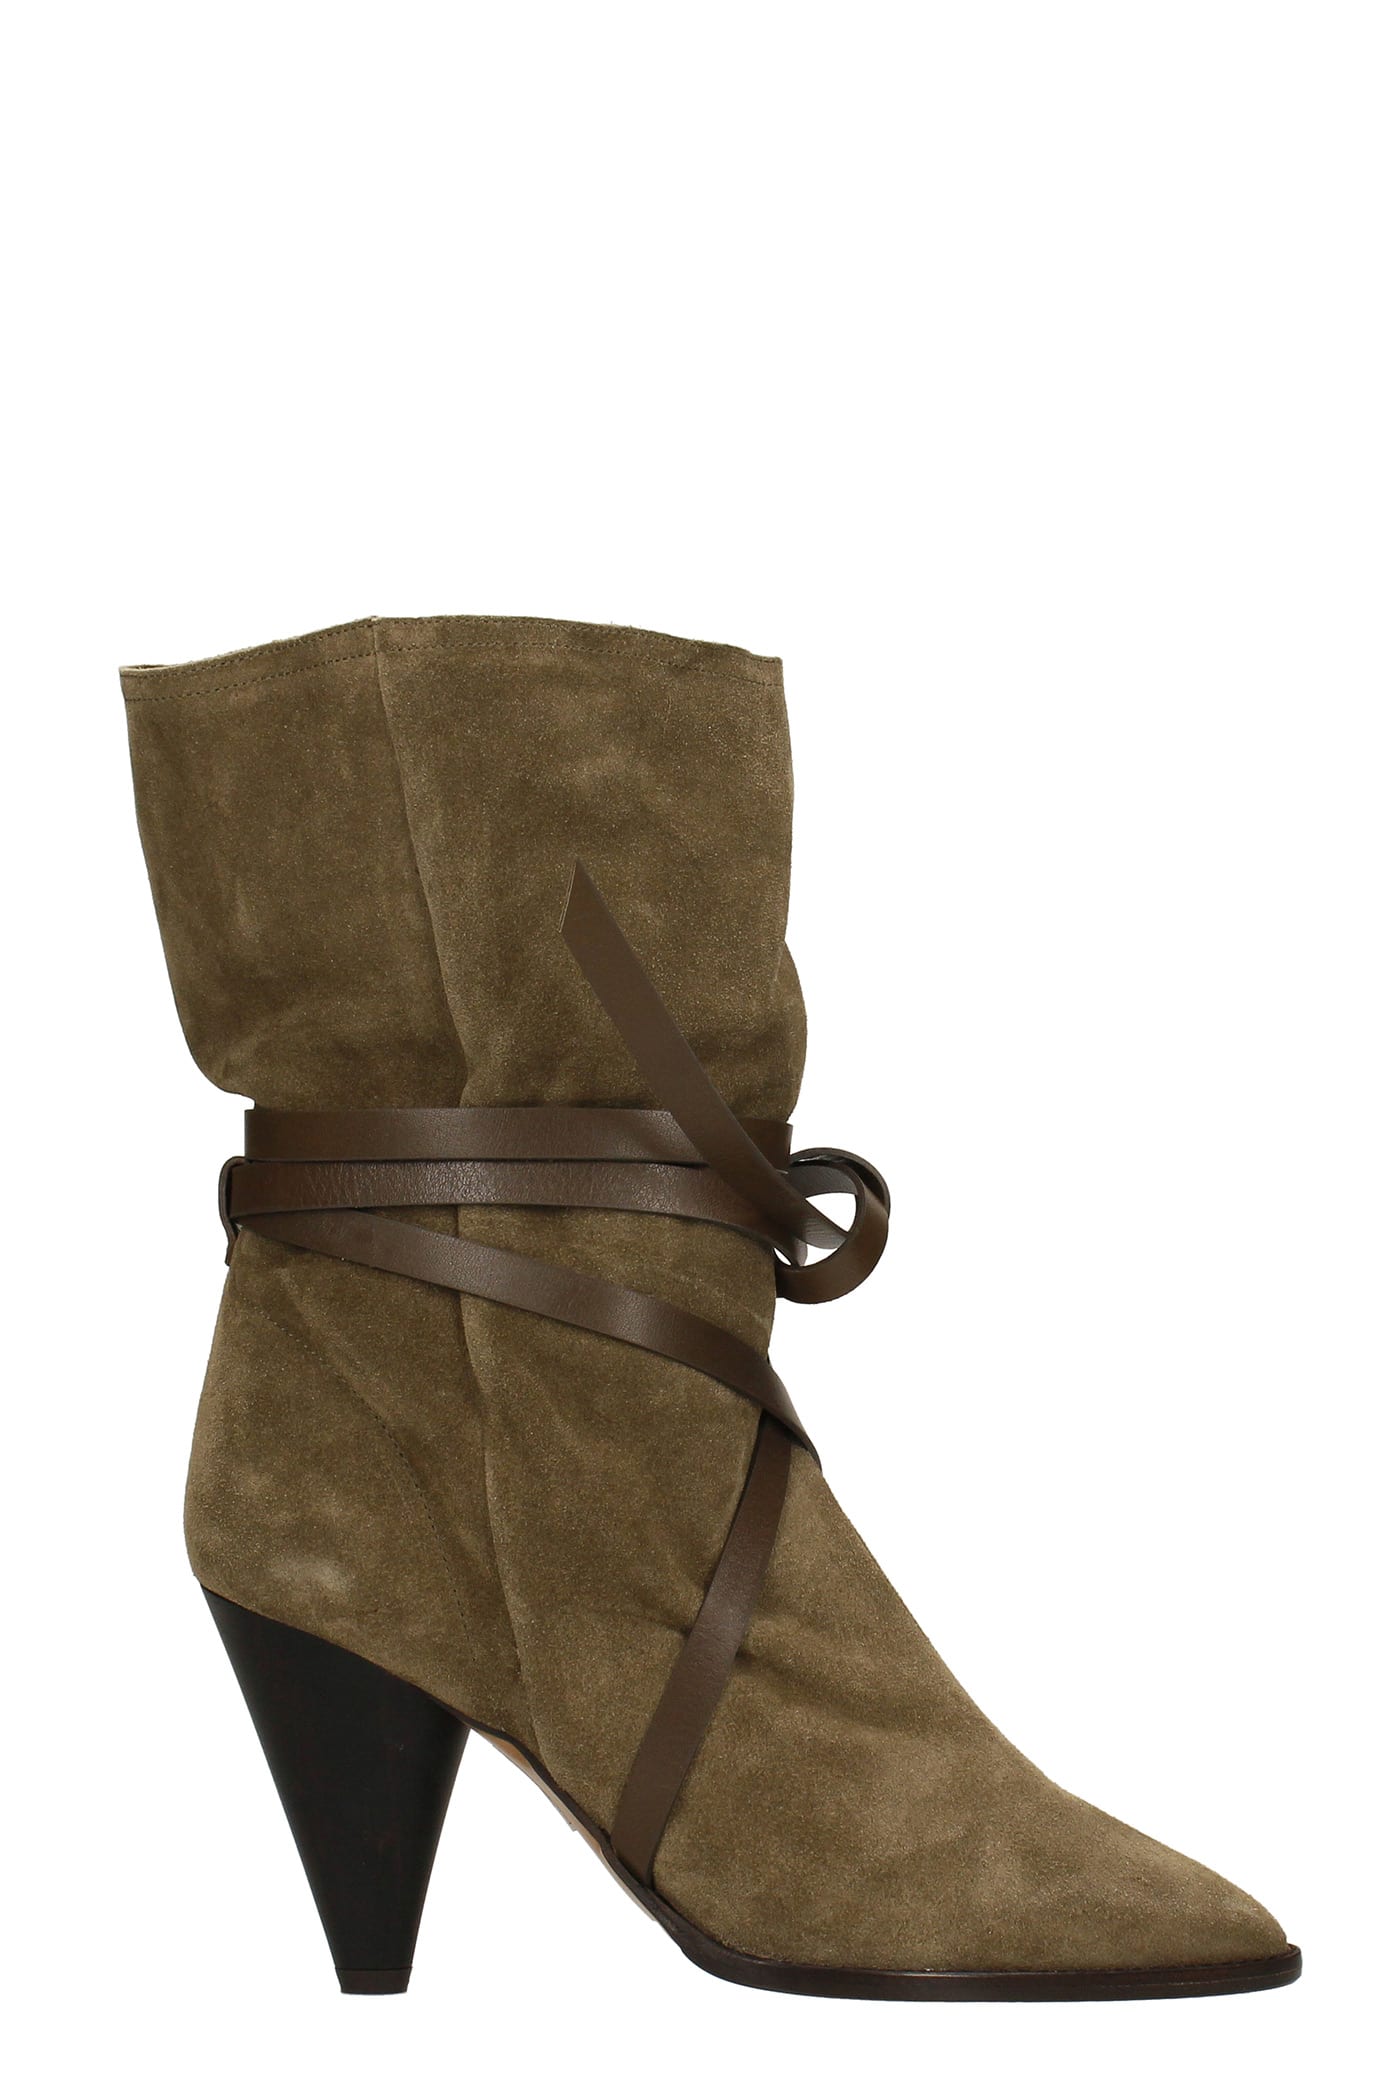 Isabel Marant Lidly Ankle Boots In Taupe Suede